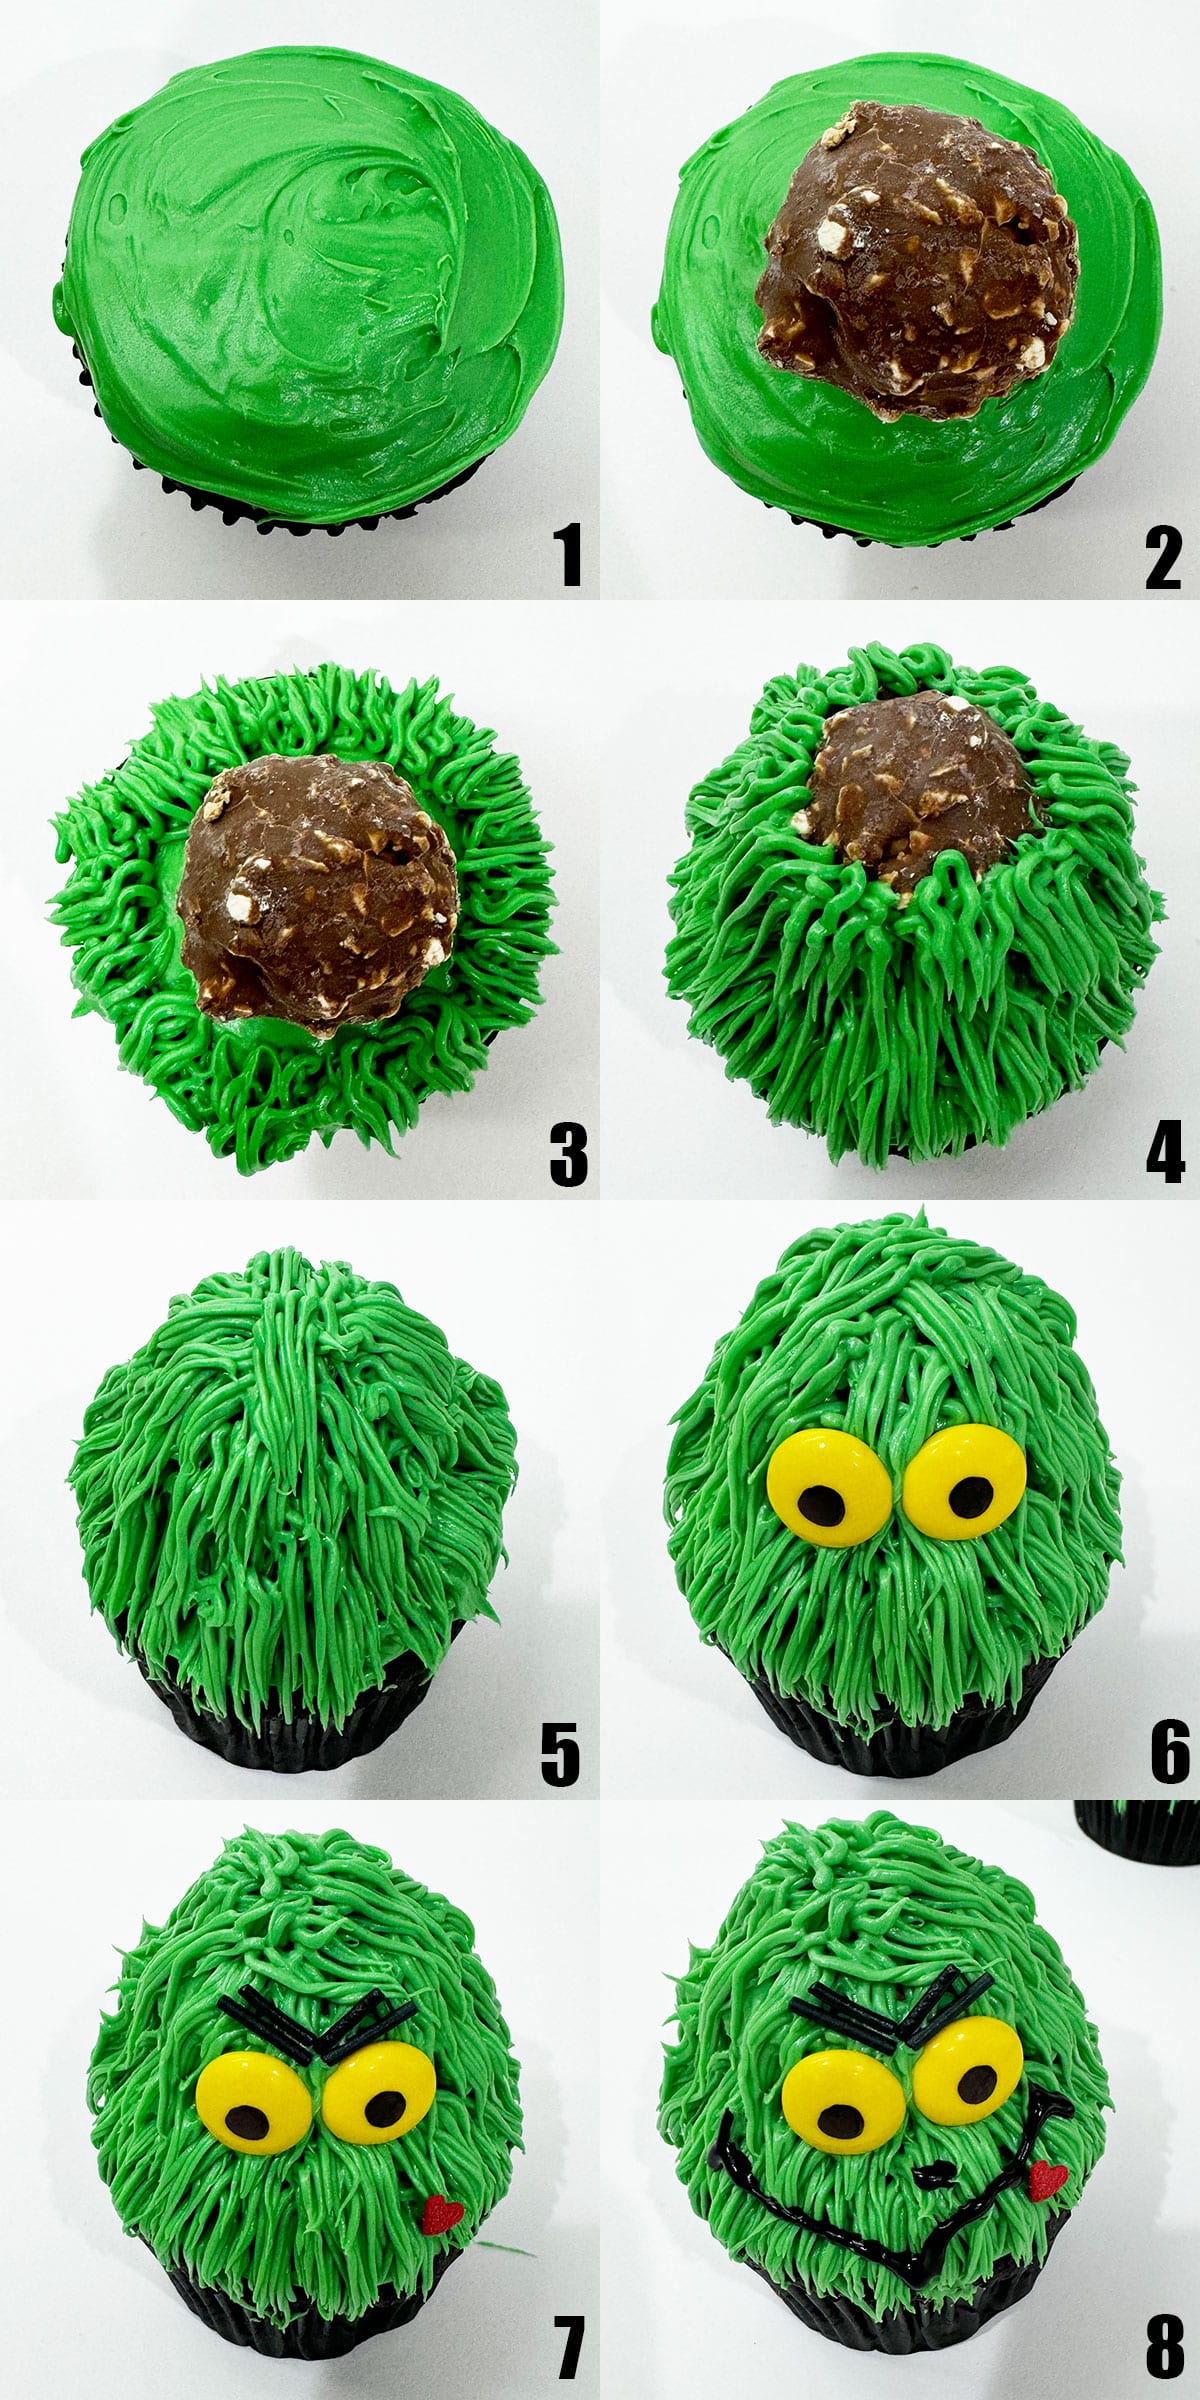 Collage Image With Step by Step process Shots on How to Make Grinch Cupcakes.